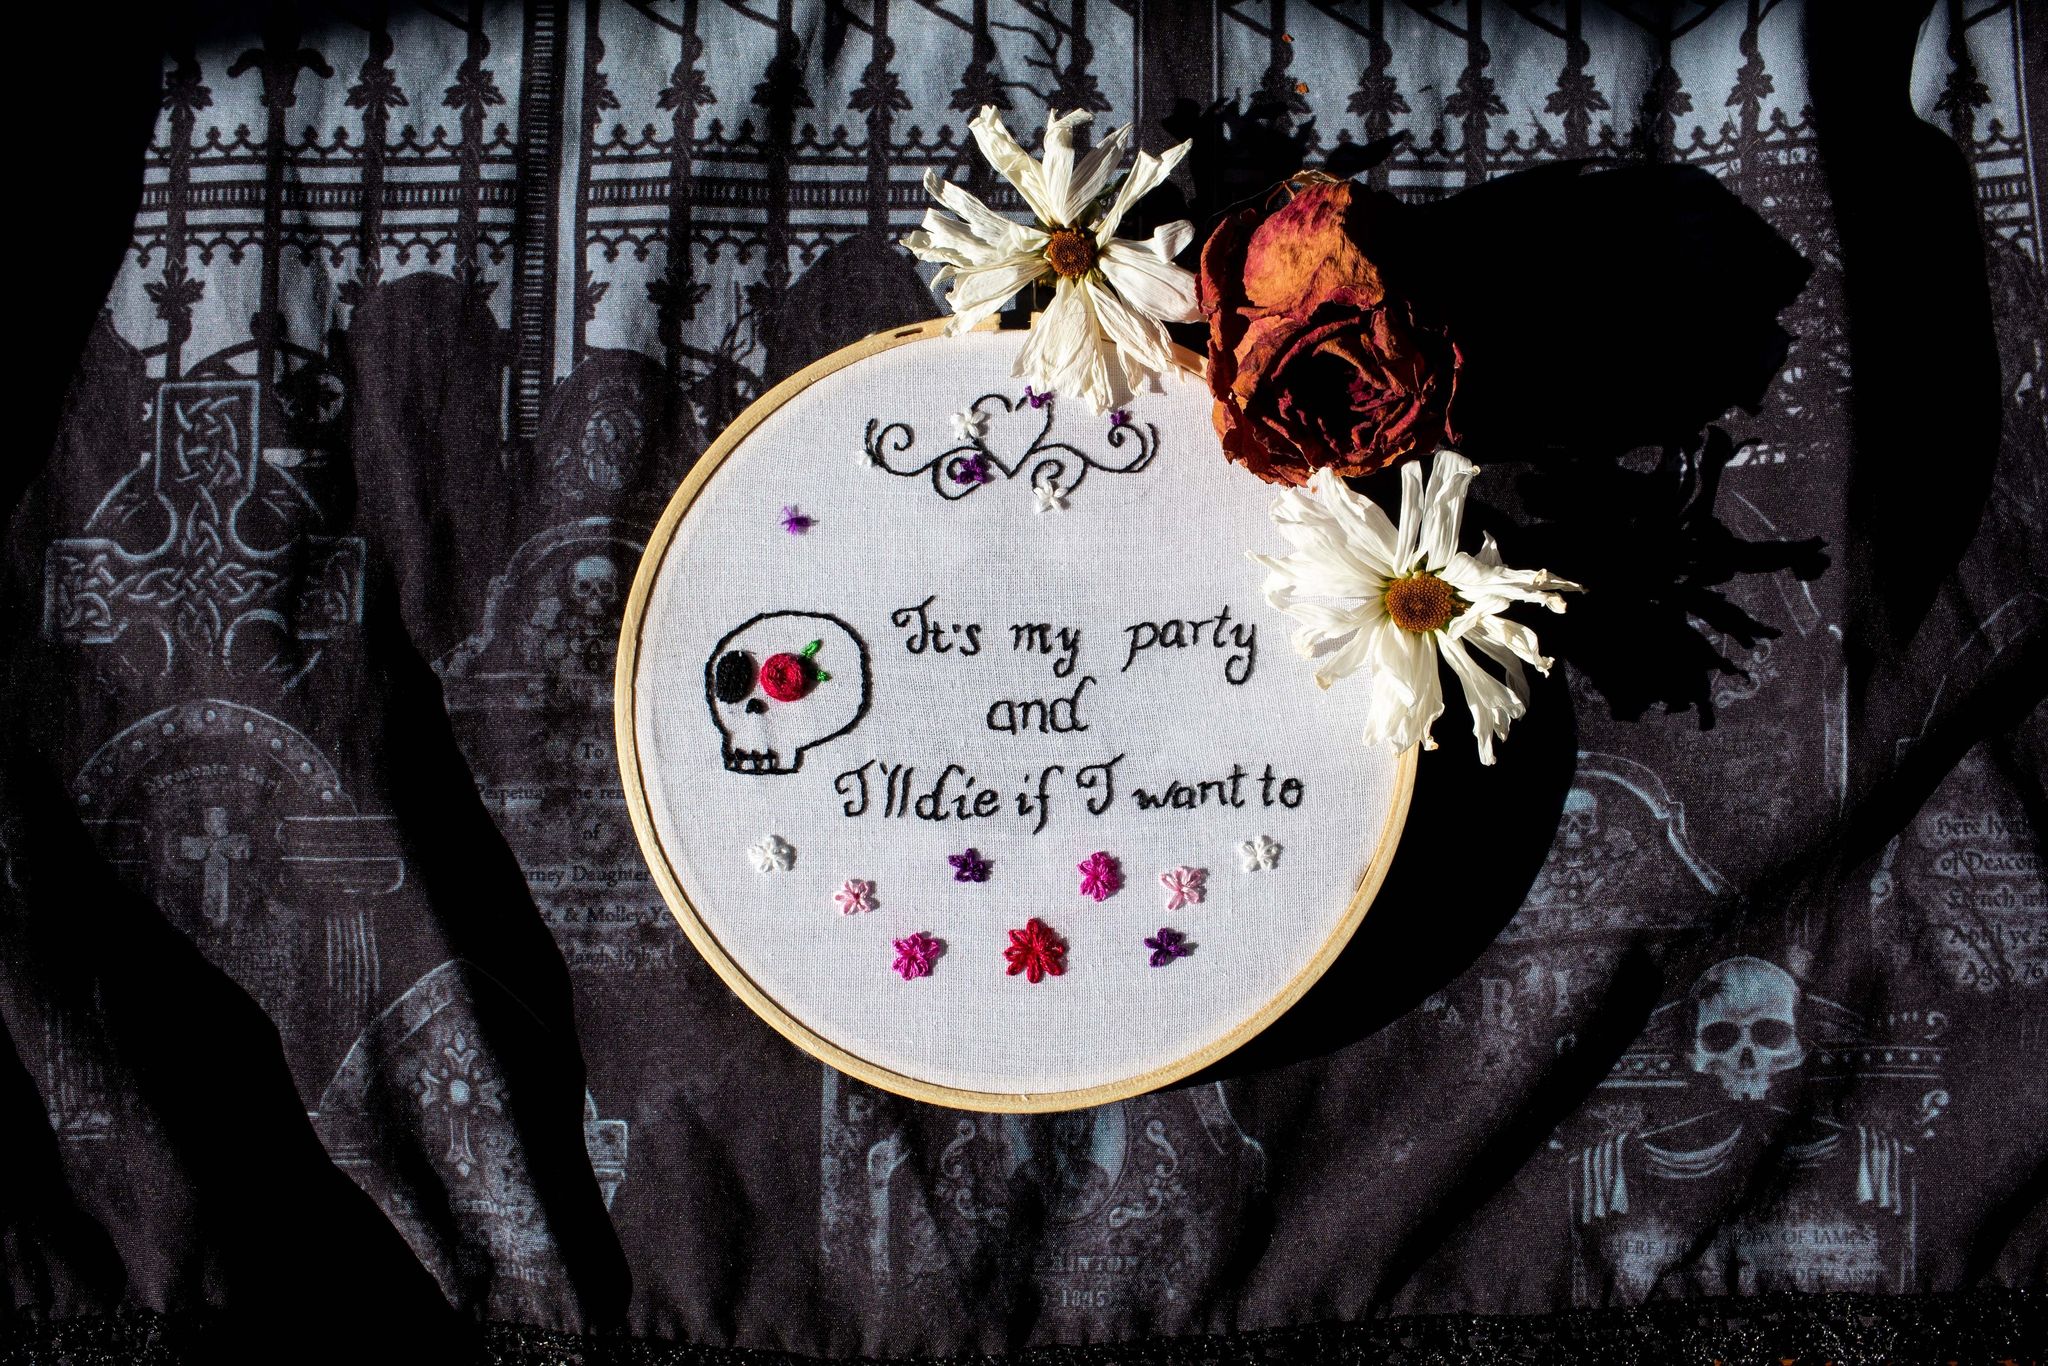 Product image of "It's MY Party" embroidery on  a cemetery backdrop framed with dead flowers